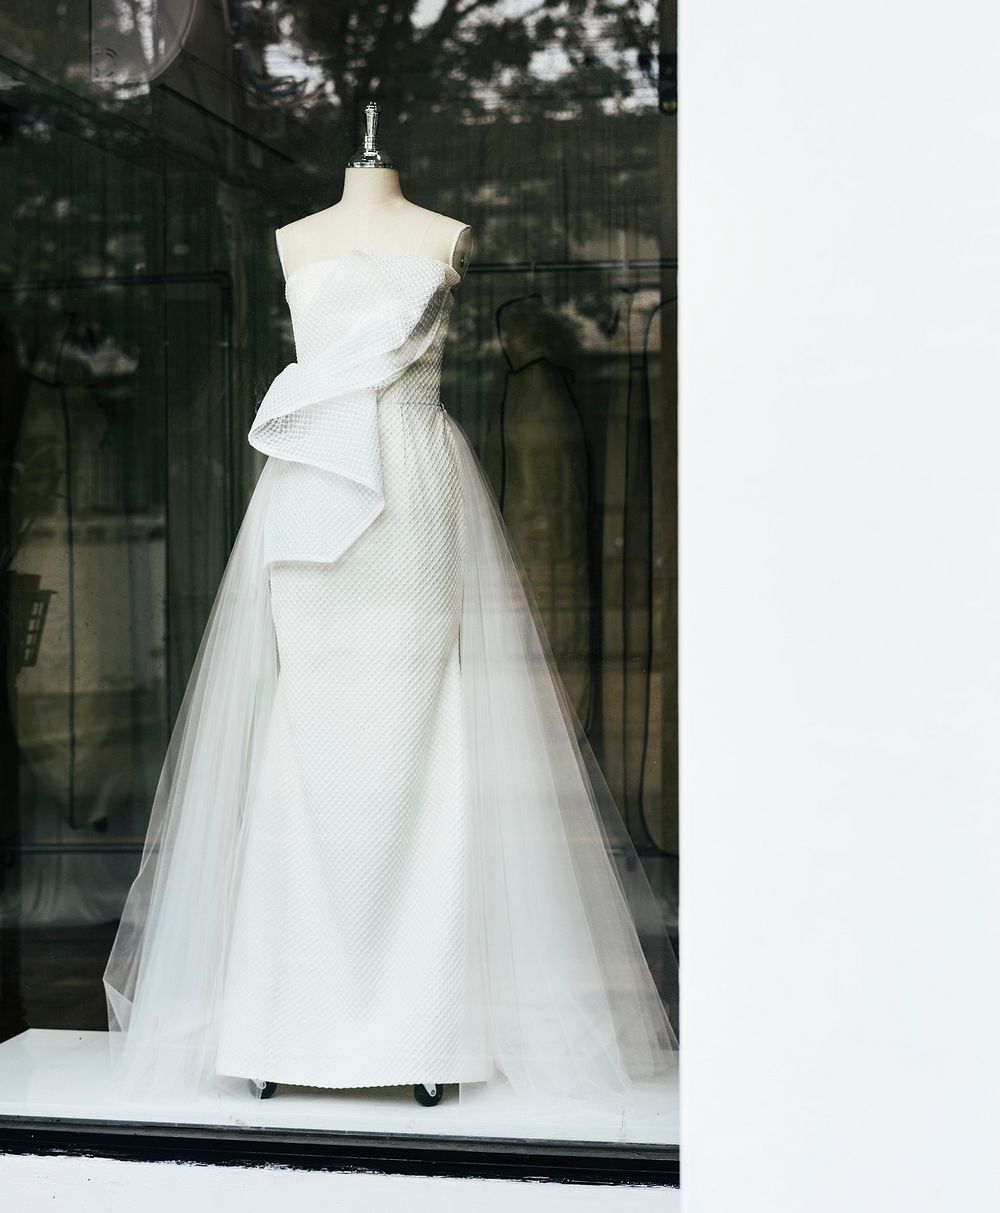 Mannequin wearing a white wedding dress on a display